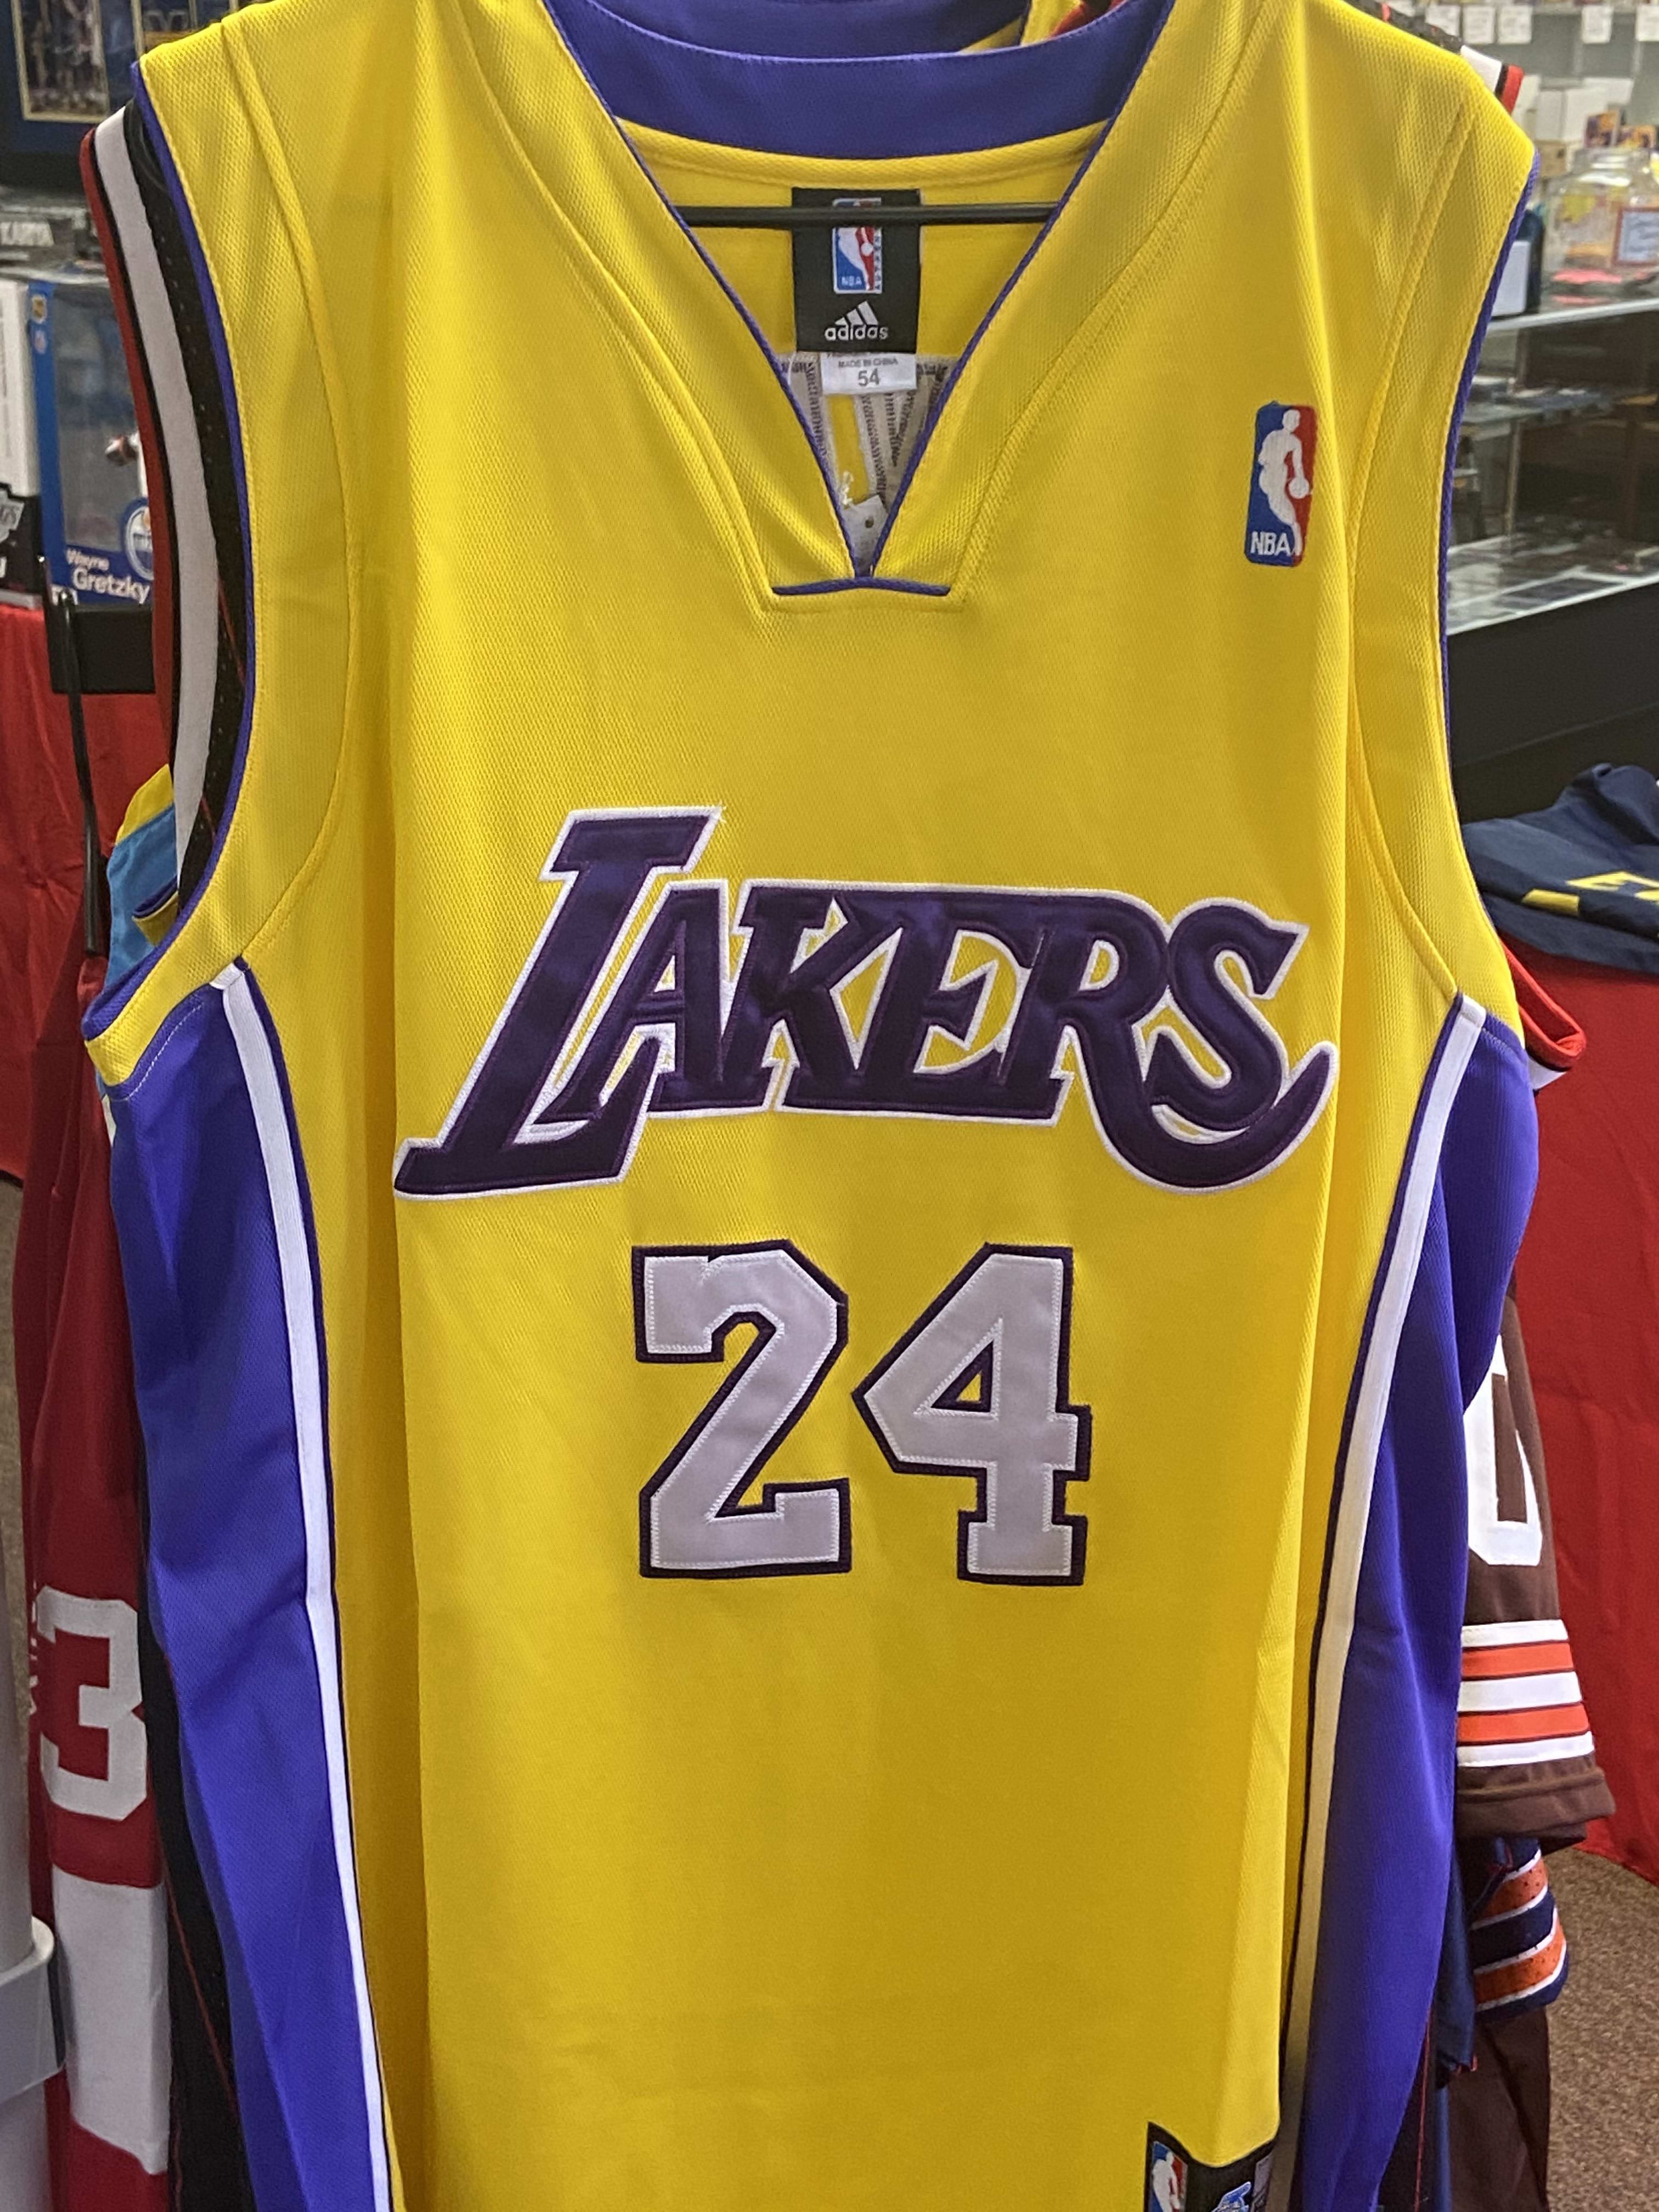 lakers 54 jersey